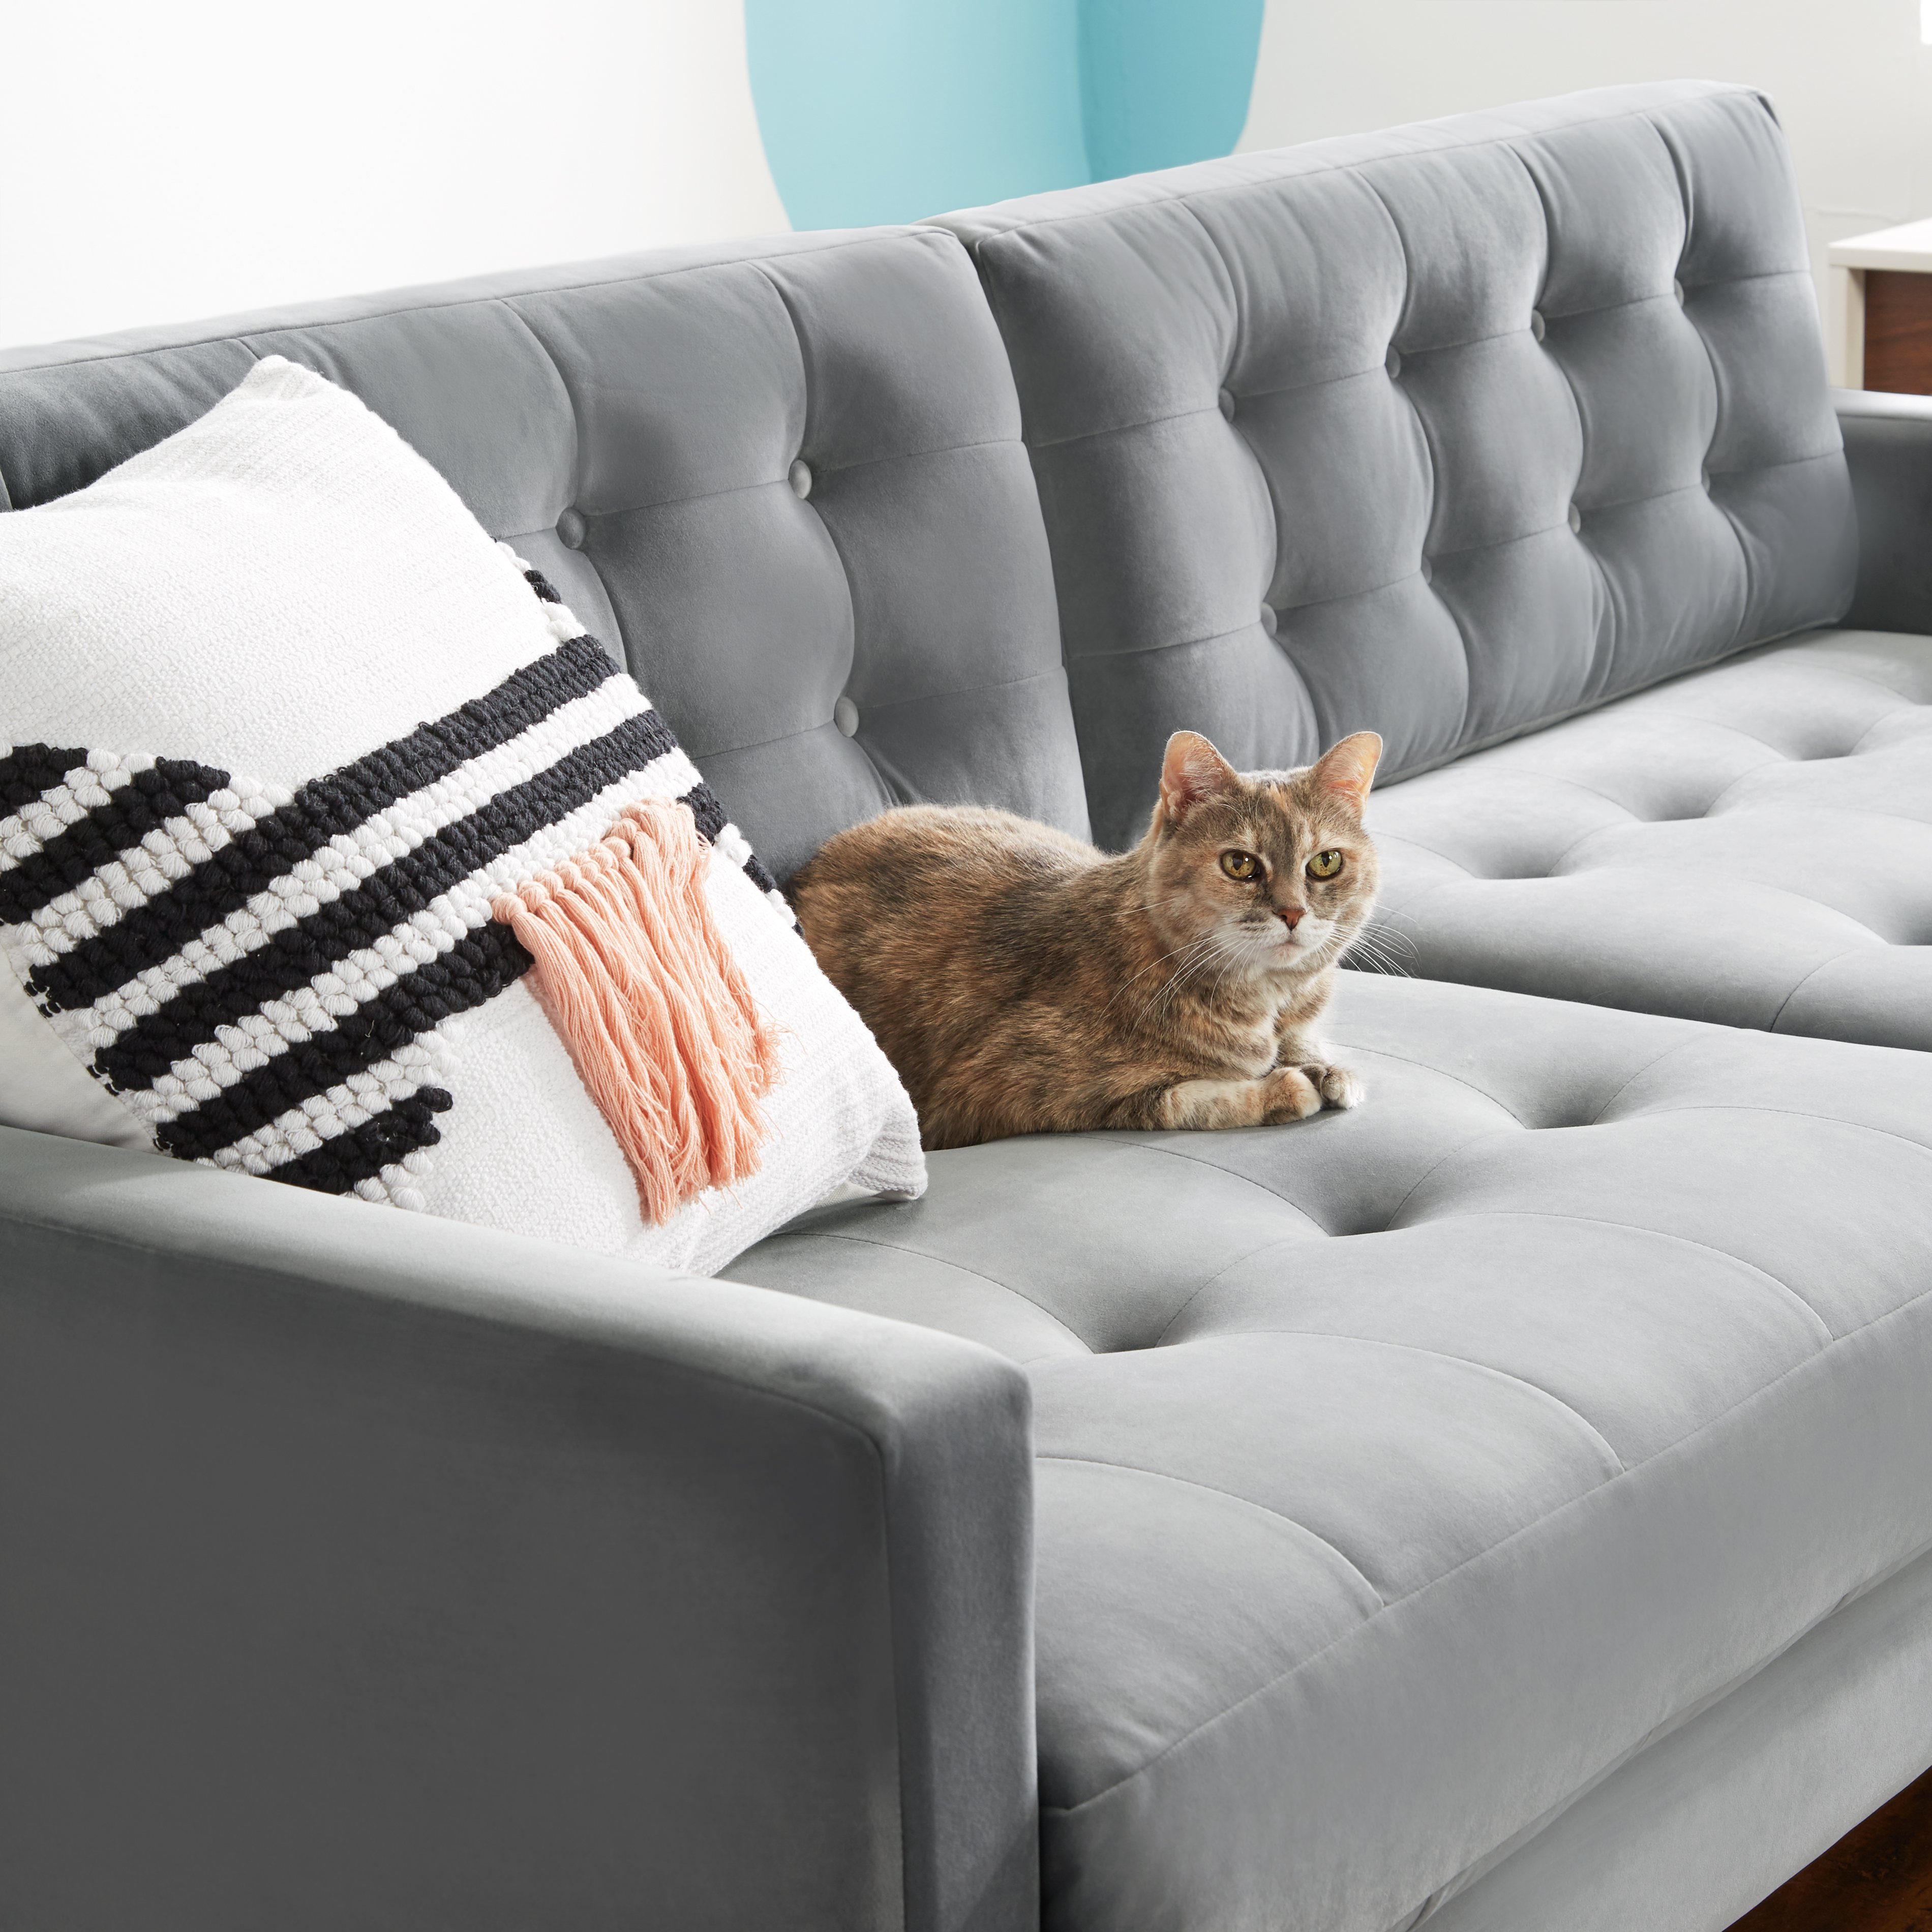 Leather Vs Fabric Sofa Which Couch Is, Is A Leather Couch Good For Cats